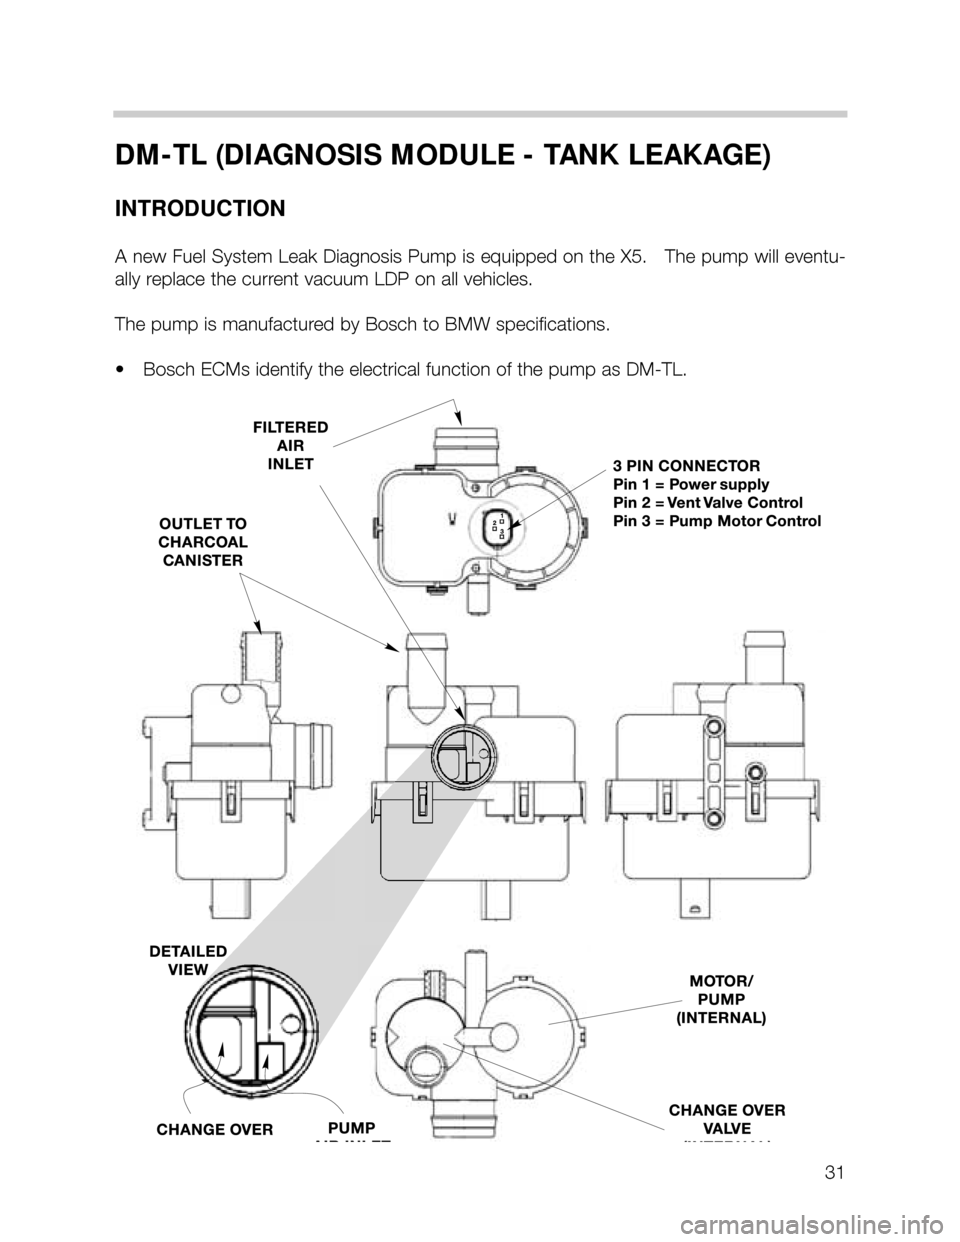 BMW X5 1999 E53 M62TU Engine Owners Guide 31
DM-TL (DIAGNOSIS MODULE - TANK LEAKAGE)
INTRODUCTION
A new Fuel System Leak Diagnosis Pump is equipped on the X5.   The pump will eventu-
ally replace the current vacuum LDP on all vehicles.
The pu